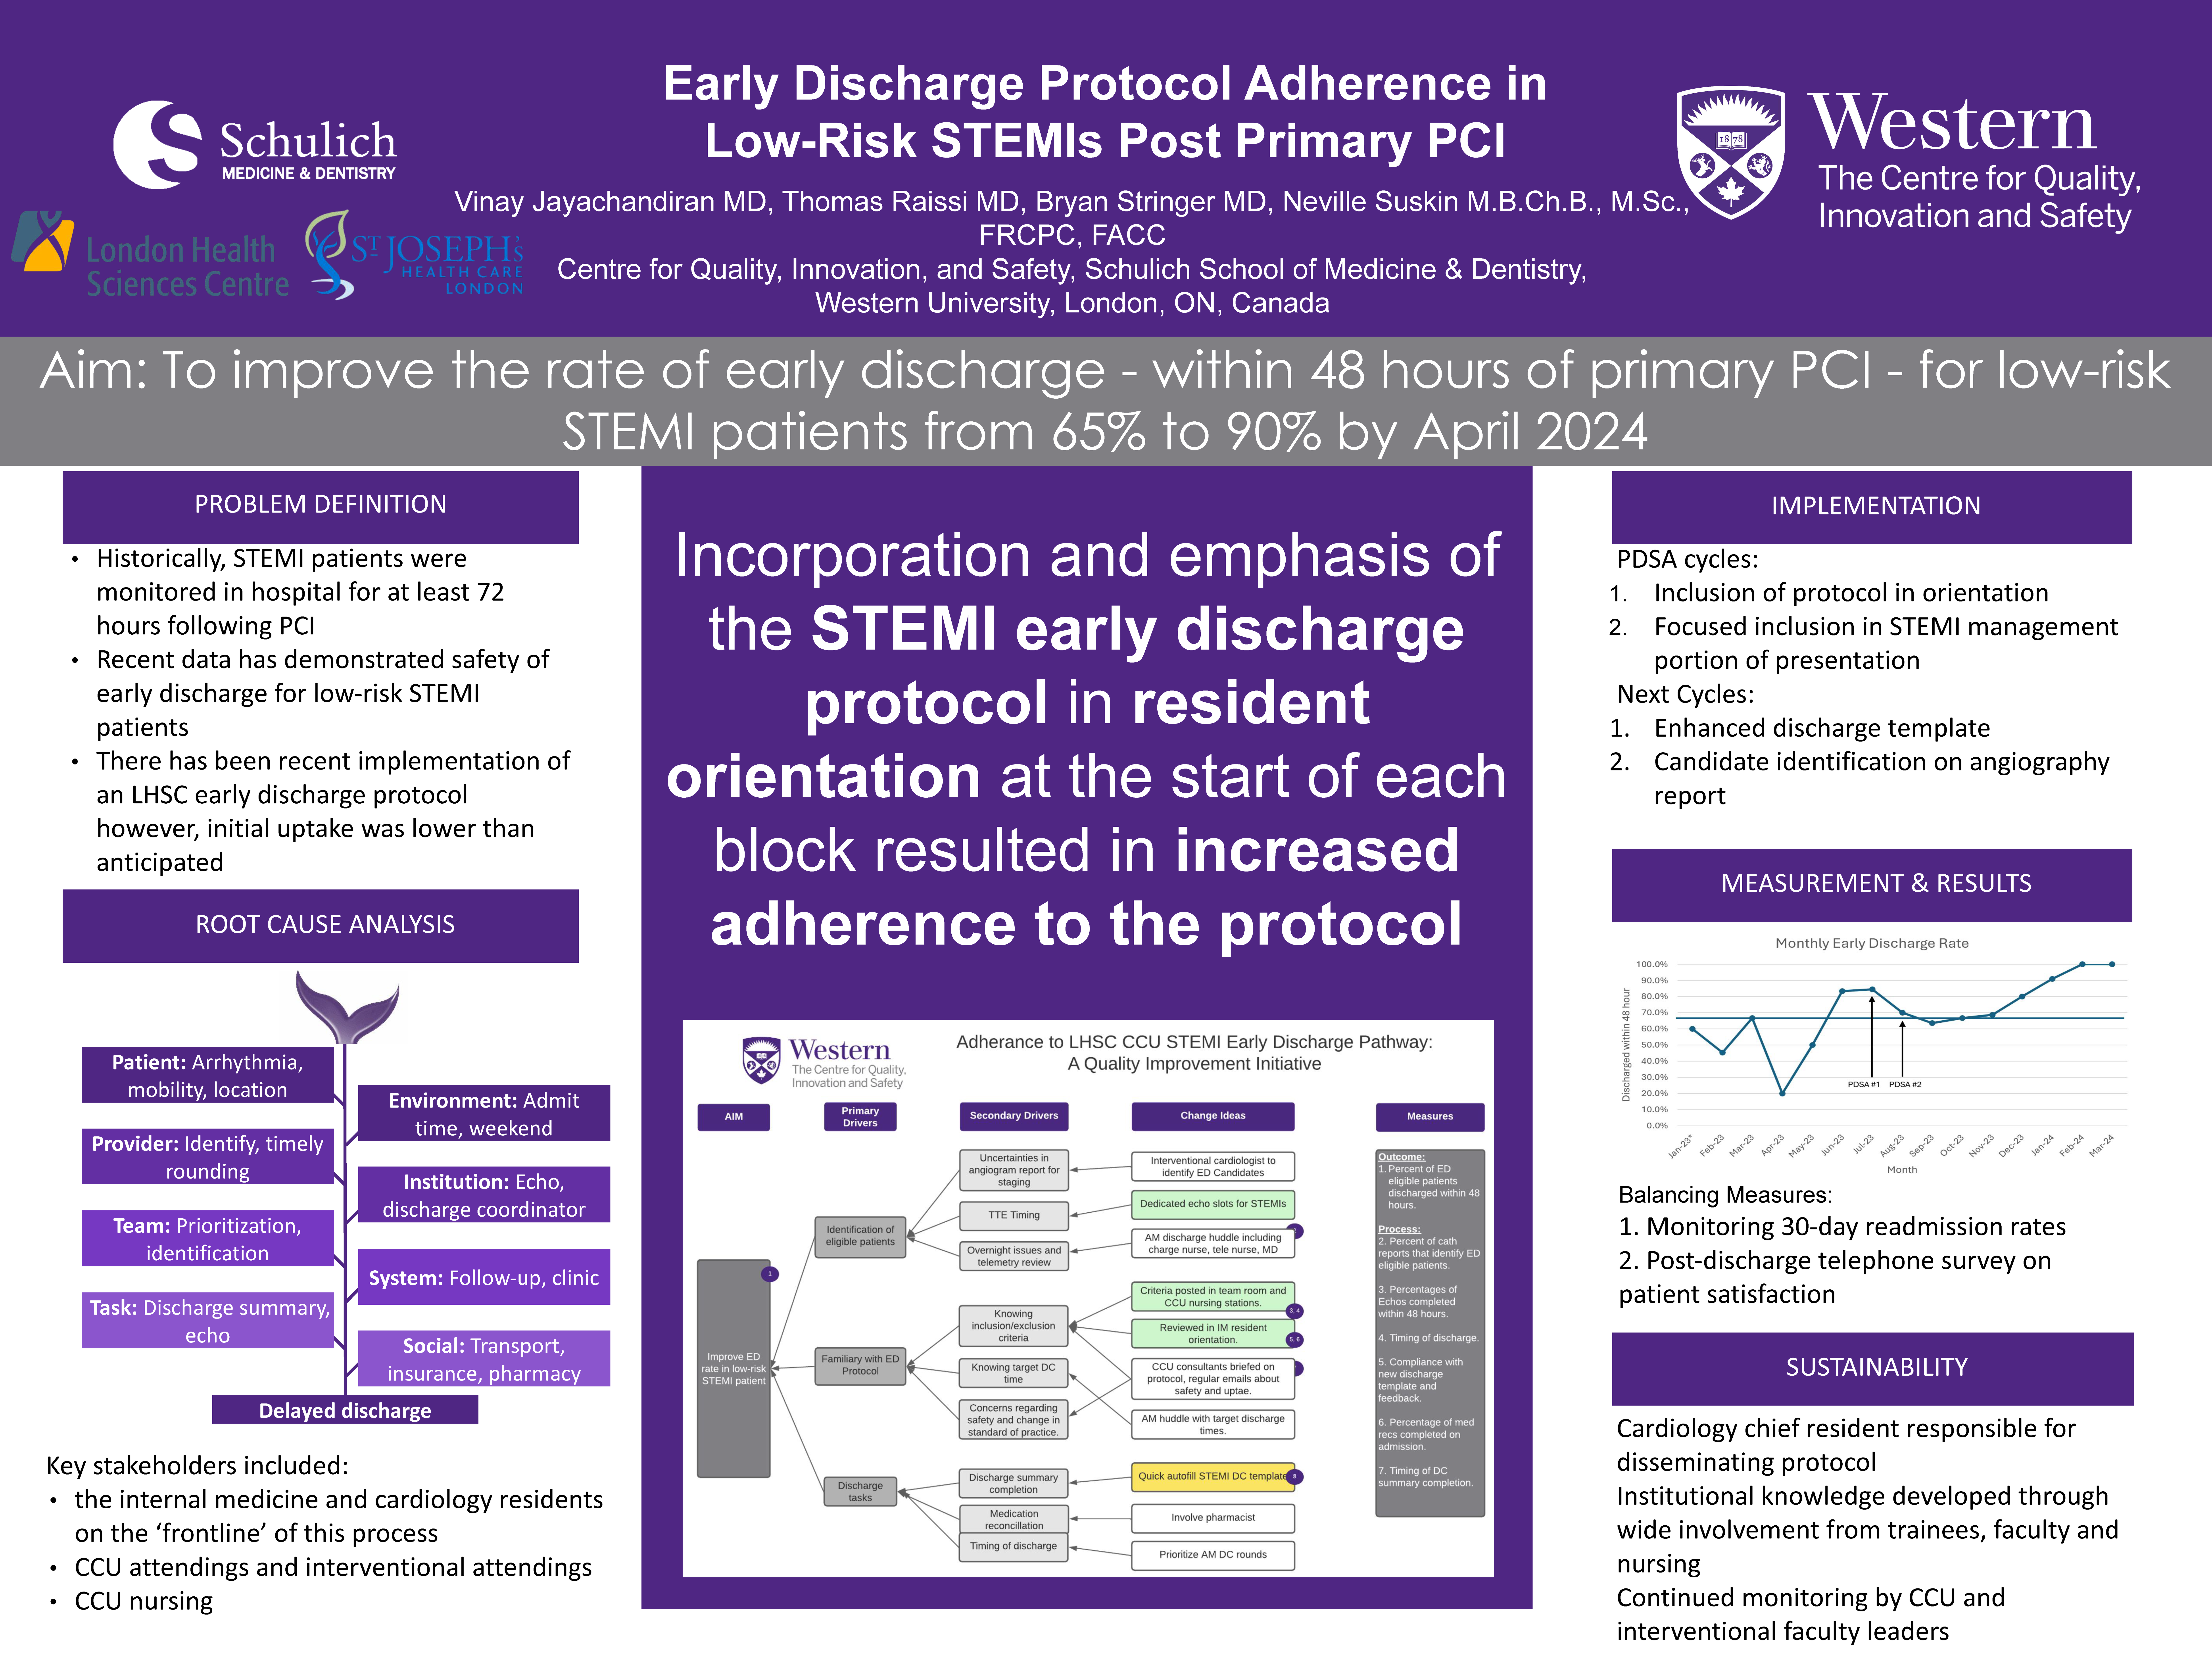 BISQ_2023-2024_Early_Discharge_Protocol_Adherence_in_Low-Risk_STEMIs_Post_Primary_PCI_Poster.png